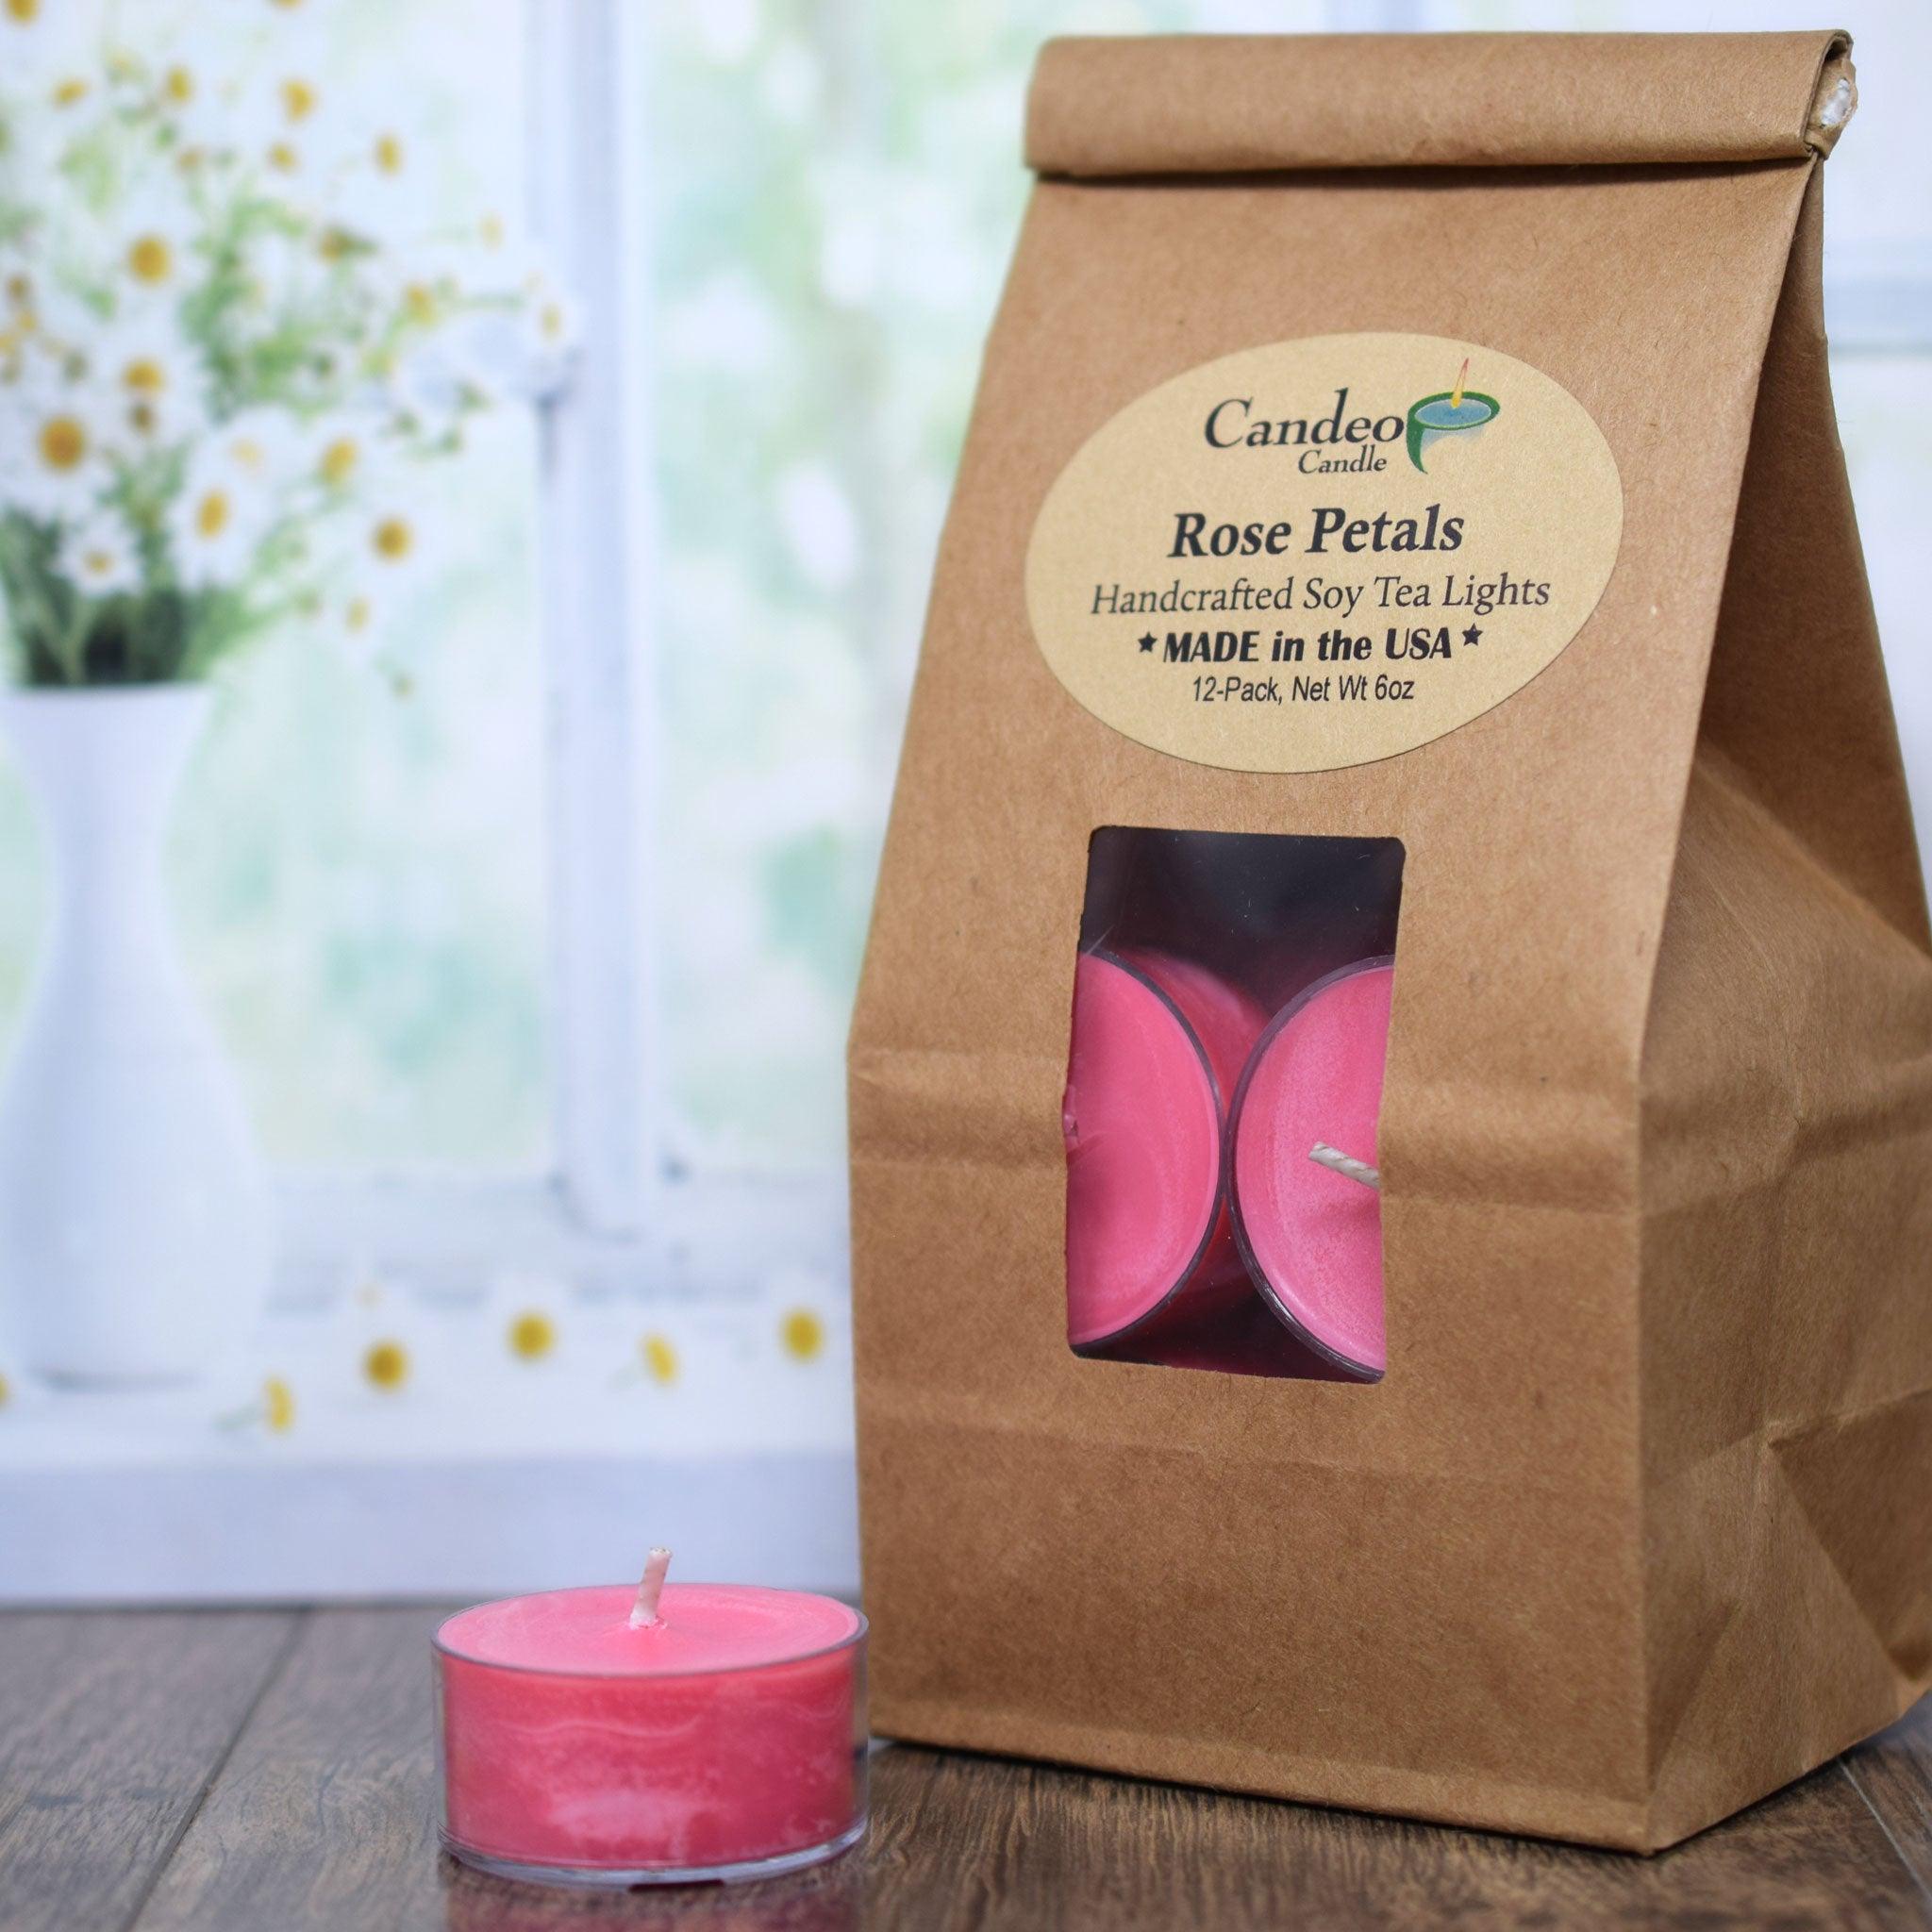 Rose Petals, Soy Tea Light 12-Pack - Candeo Candle